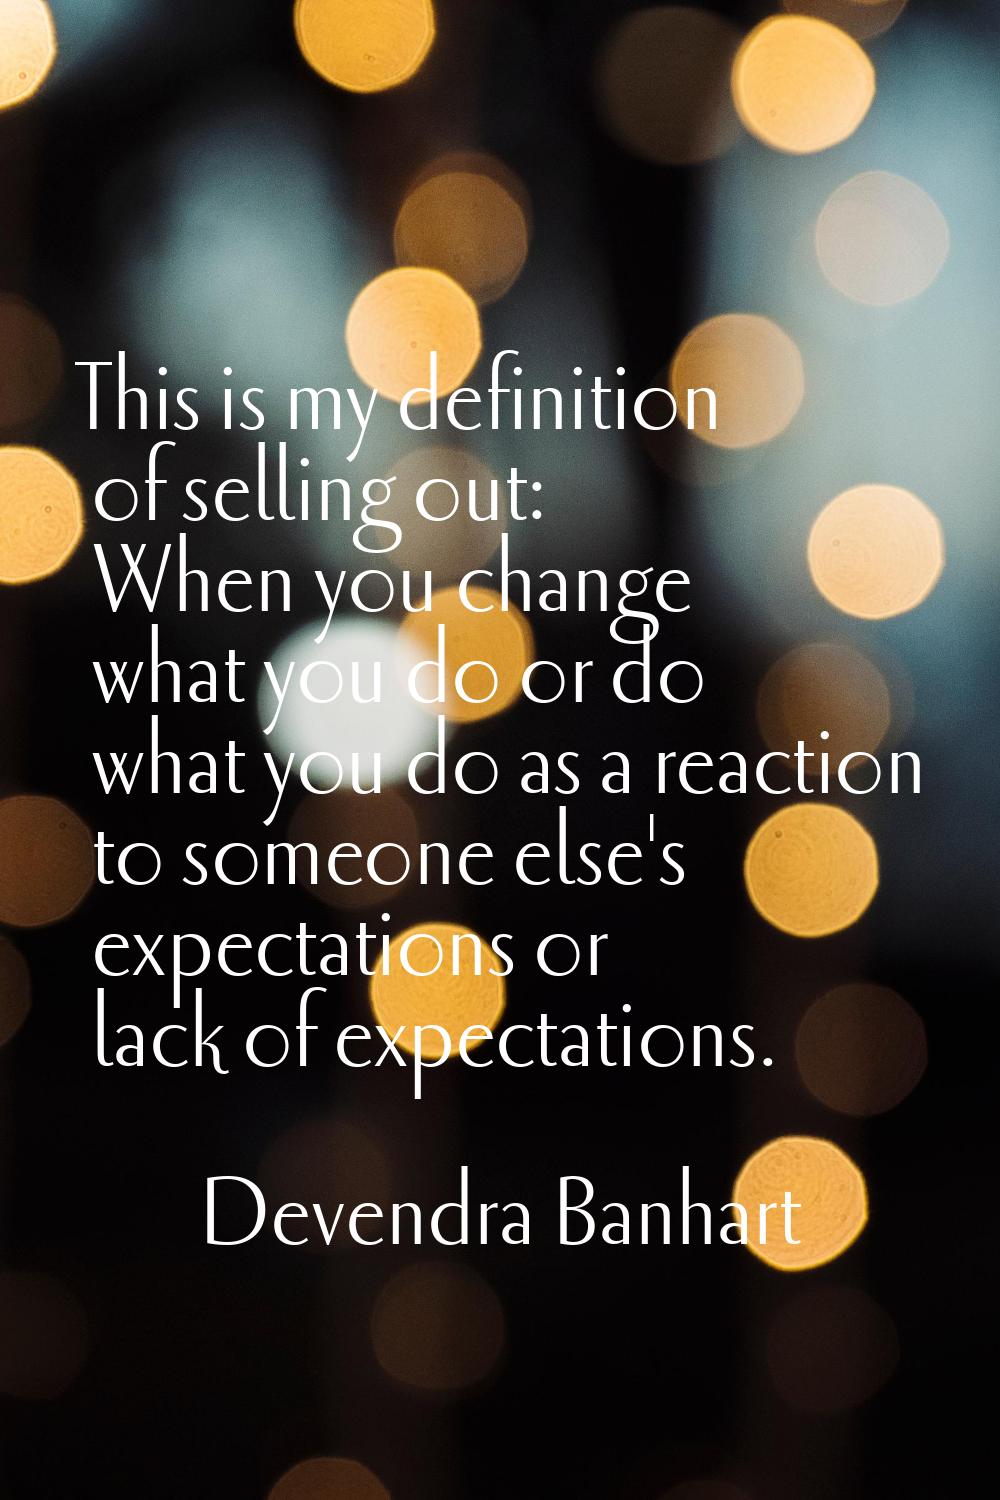 This is my definition of selling out: When you change what you do or do what you do as a reaction t